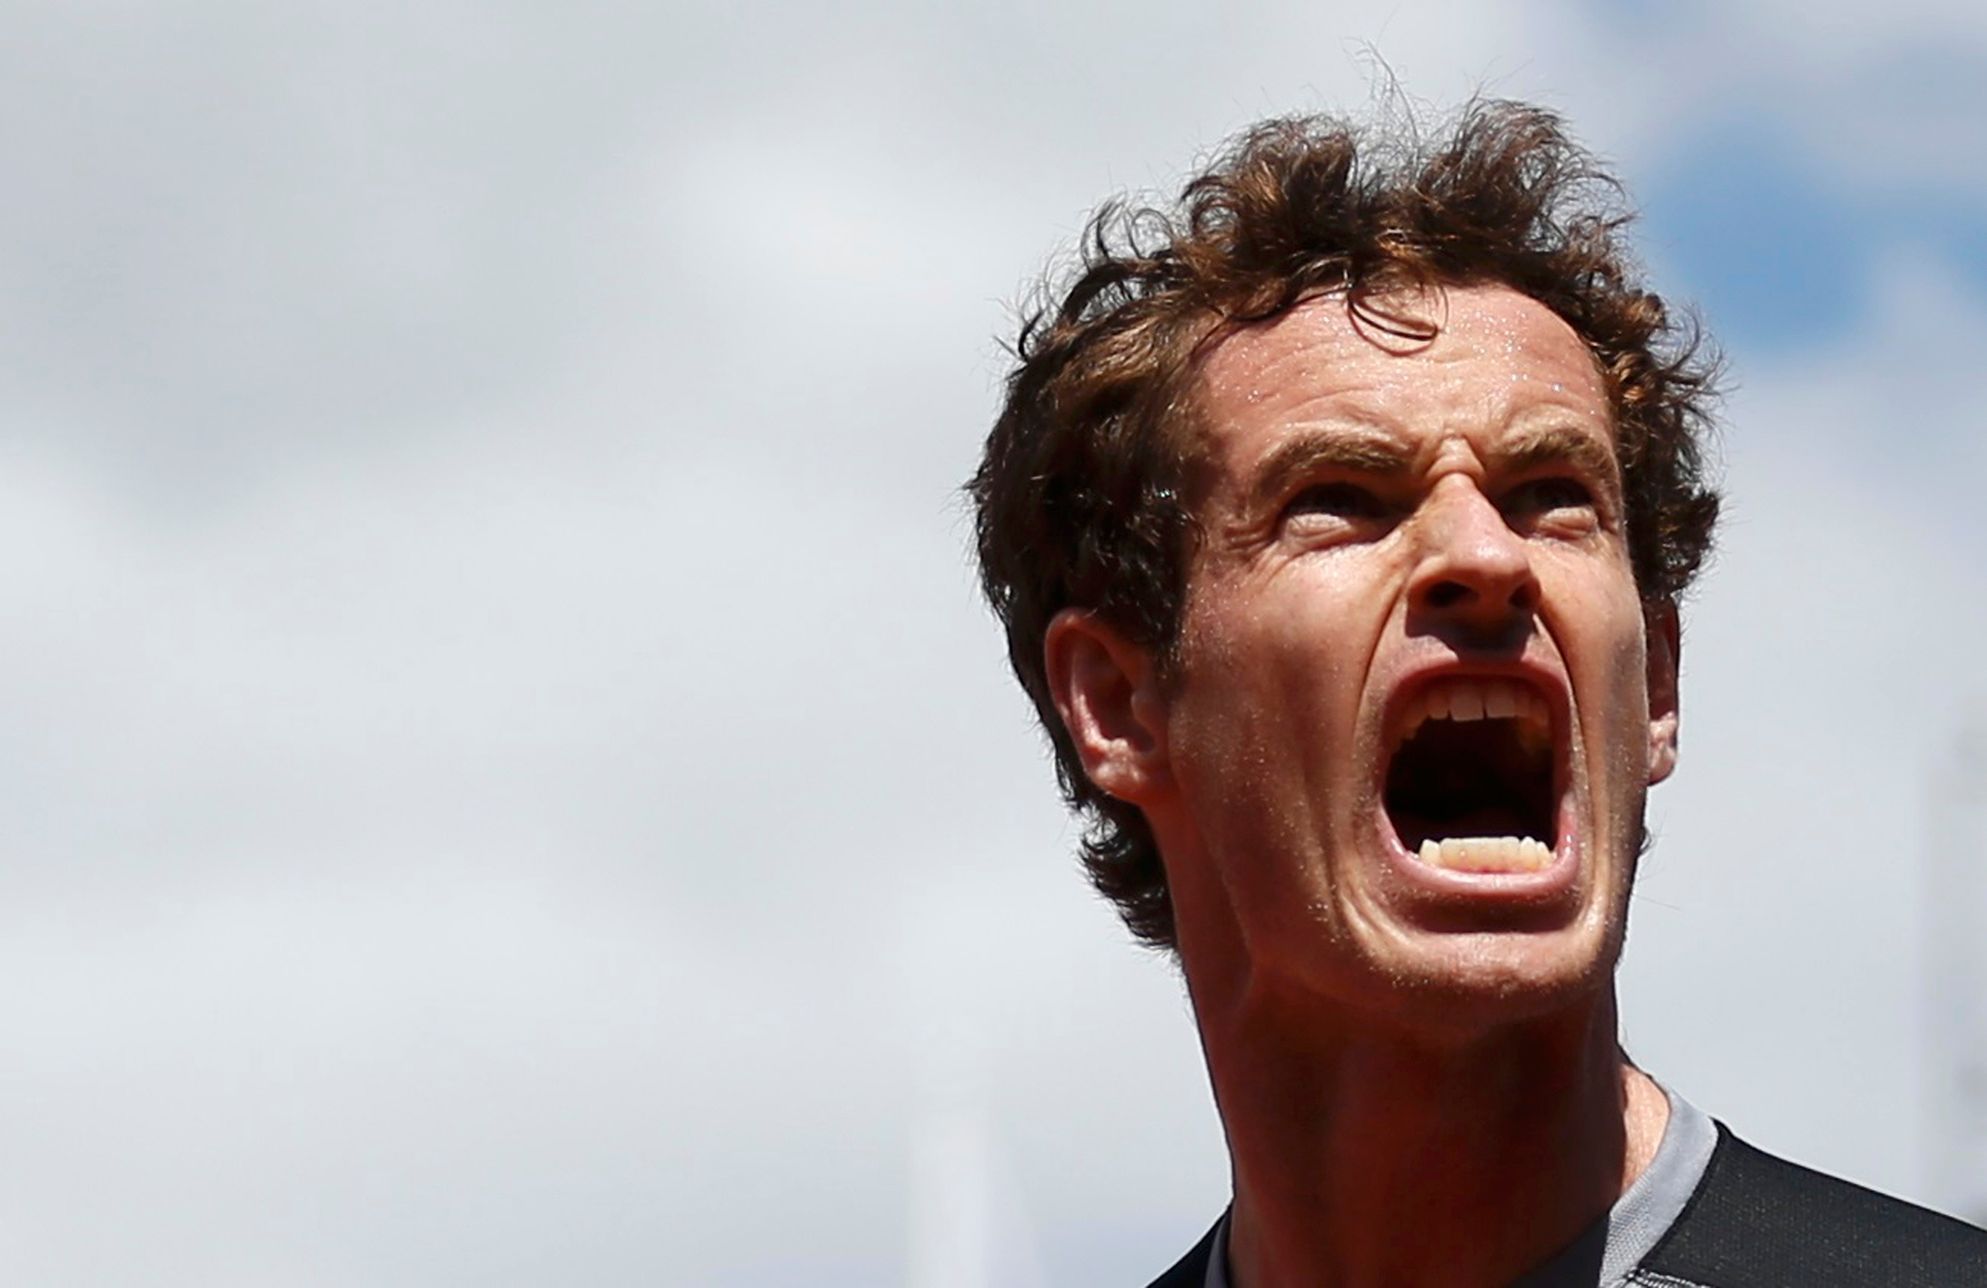 French Open 2015: Andy Murray